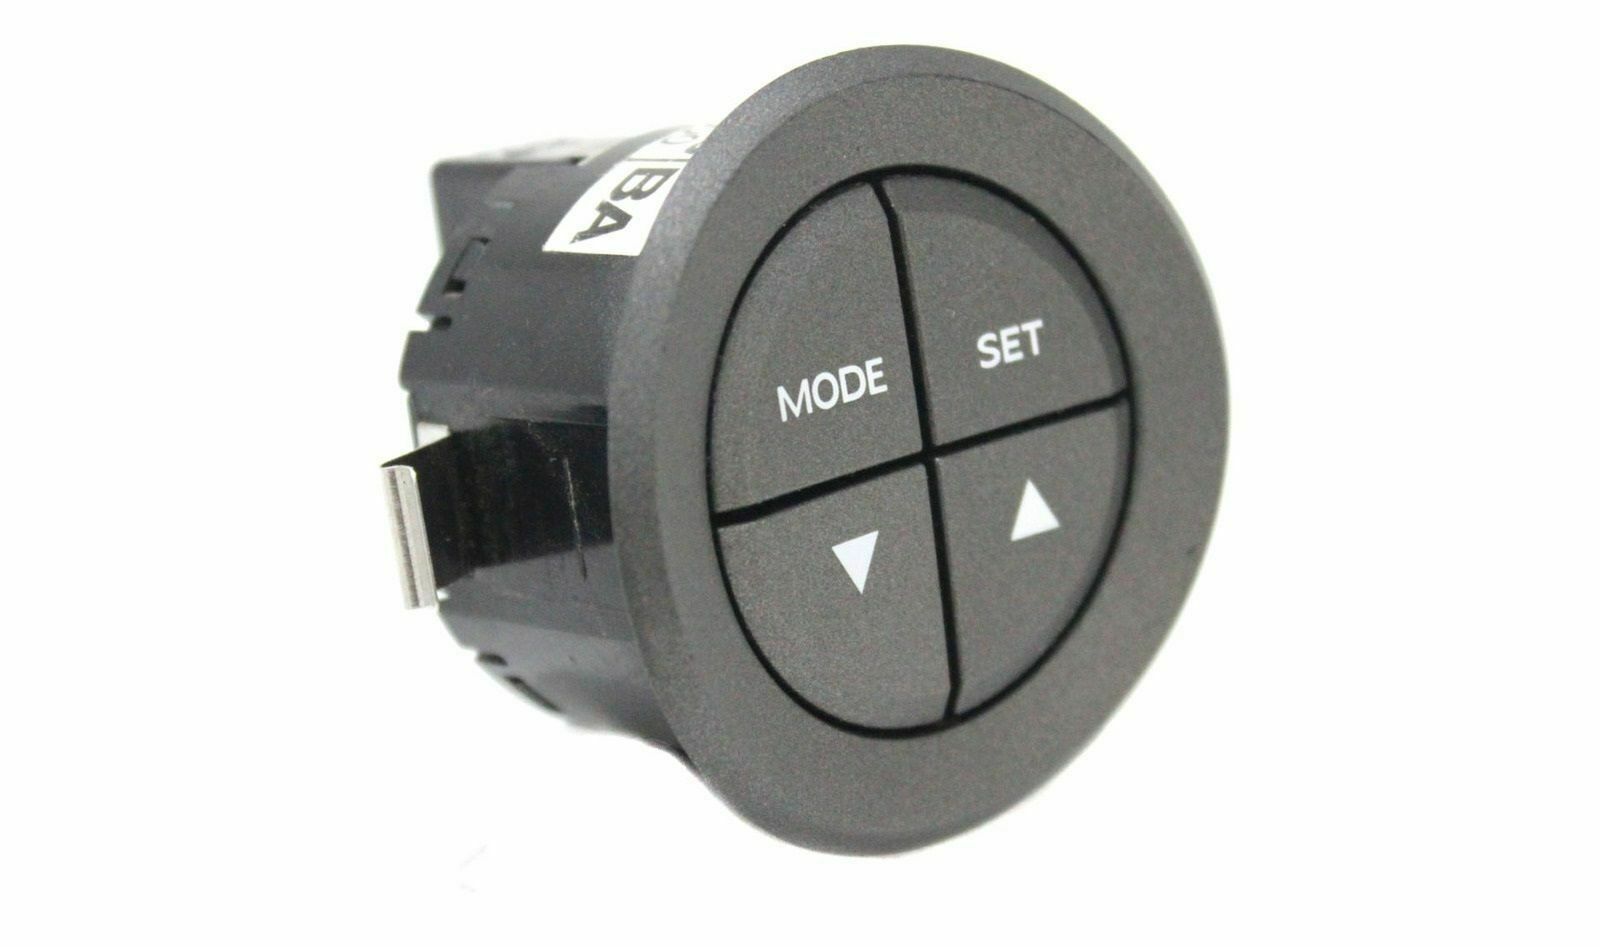 Used VY VZ Mode Switch Button Holden Commodore HSV Clubsport Nickel 92111623 